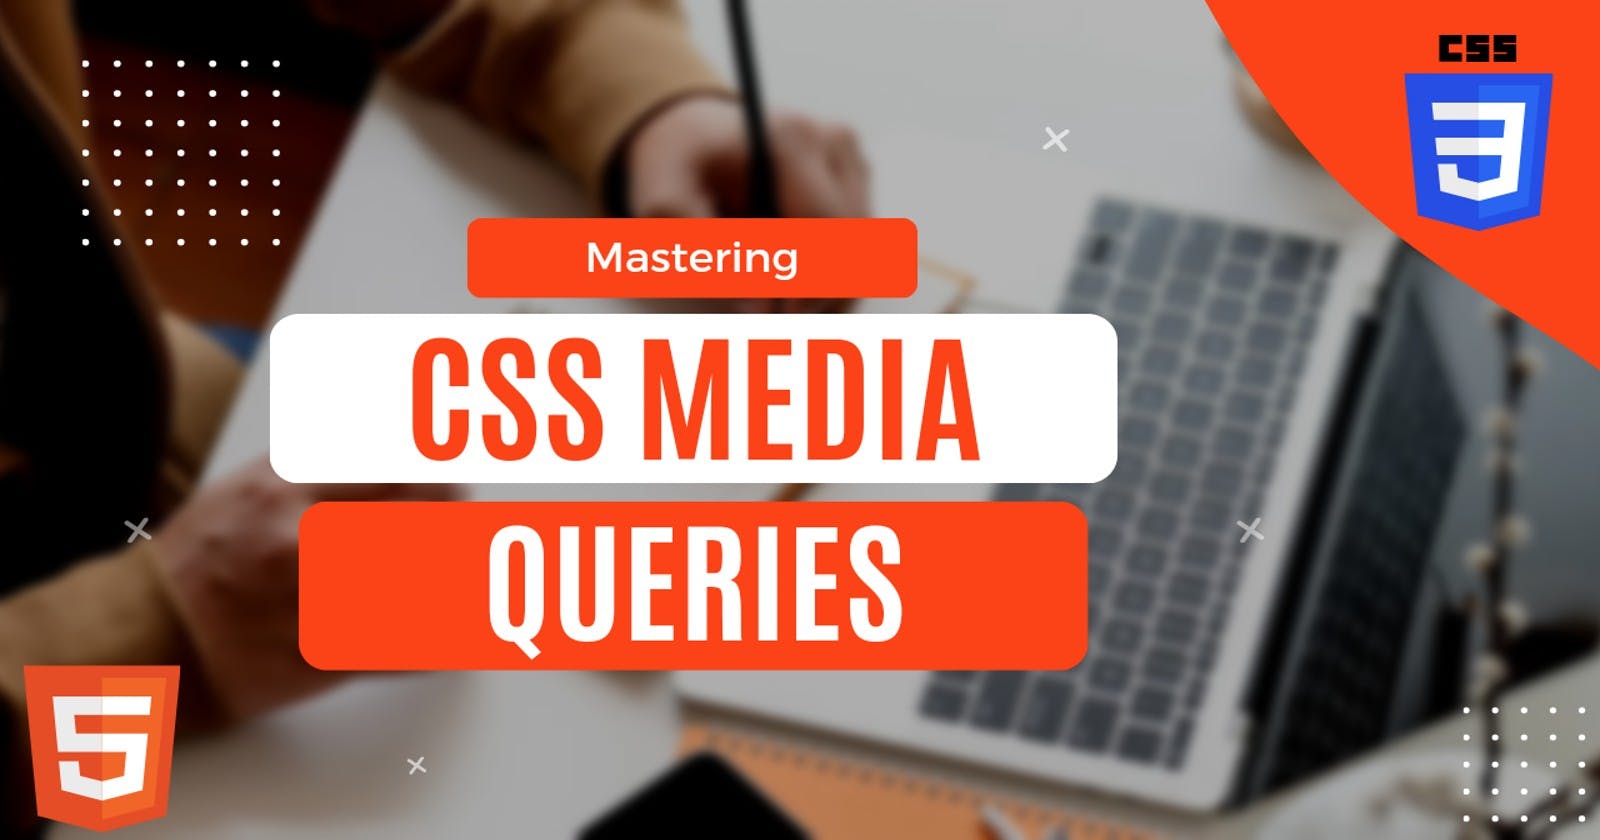 Mastering CSS Media Queries: A Practical Guide